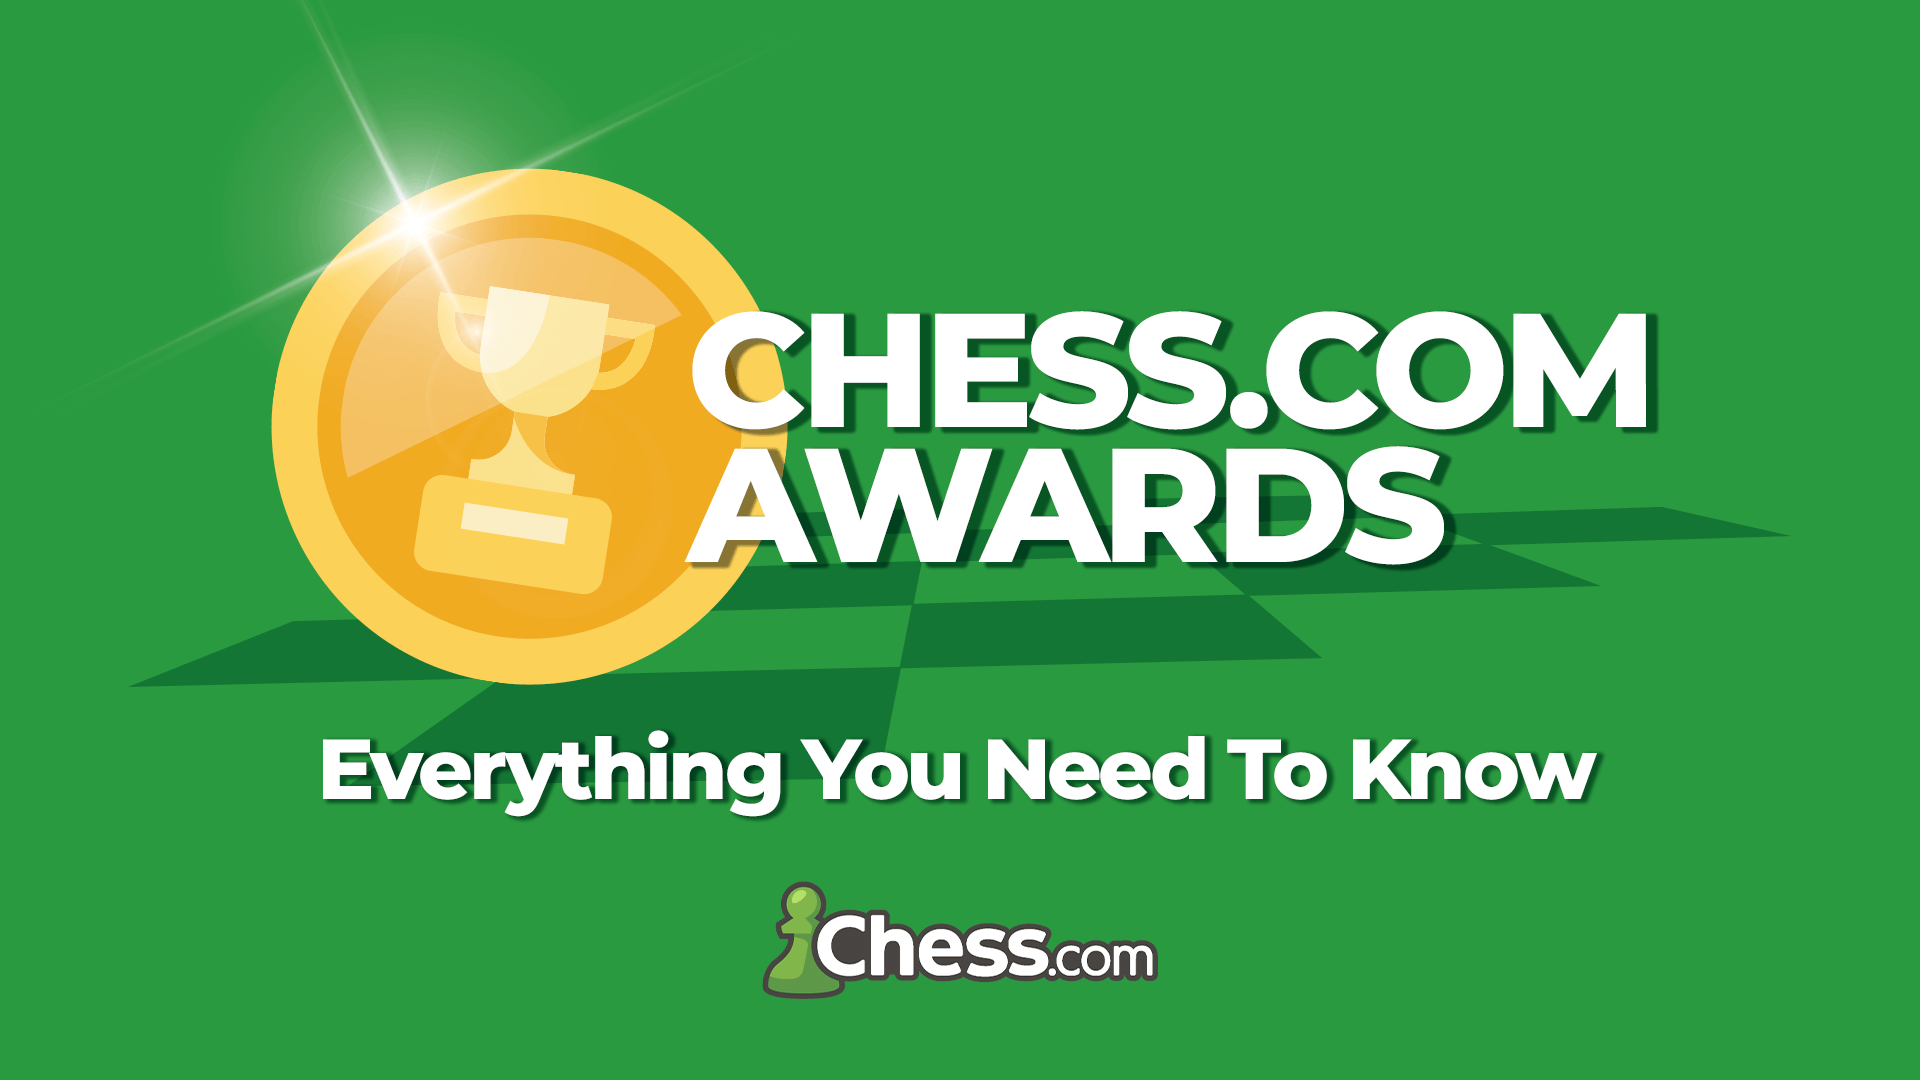 Chessable courses available through chess.com? : r/chess